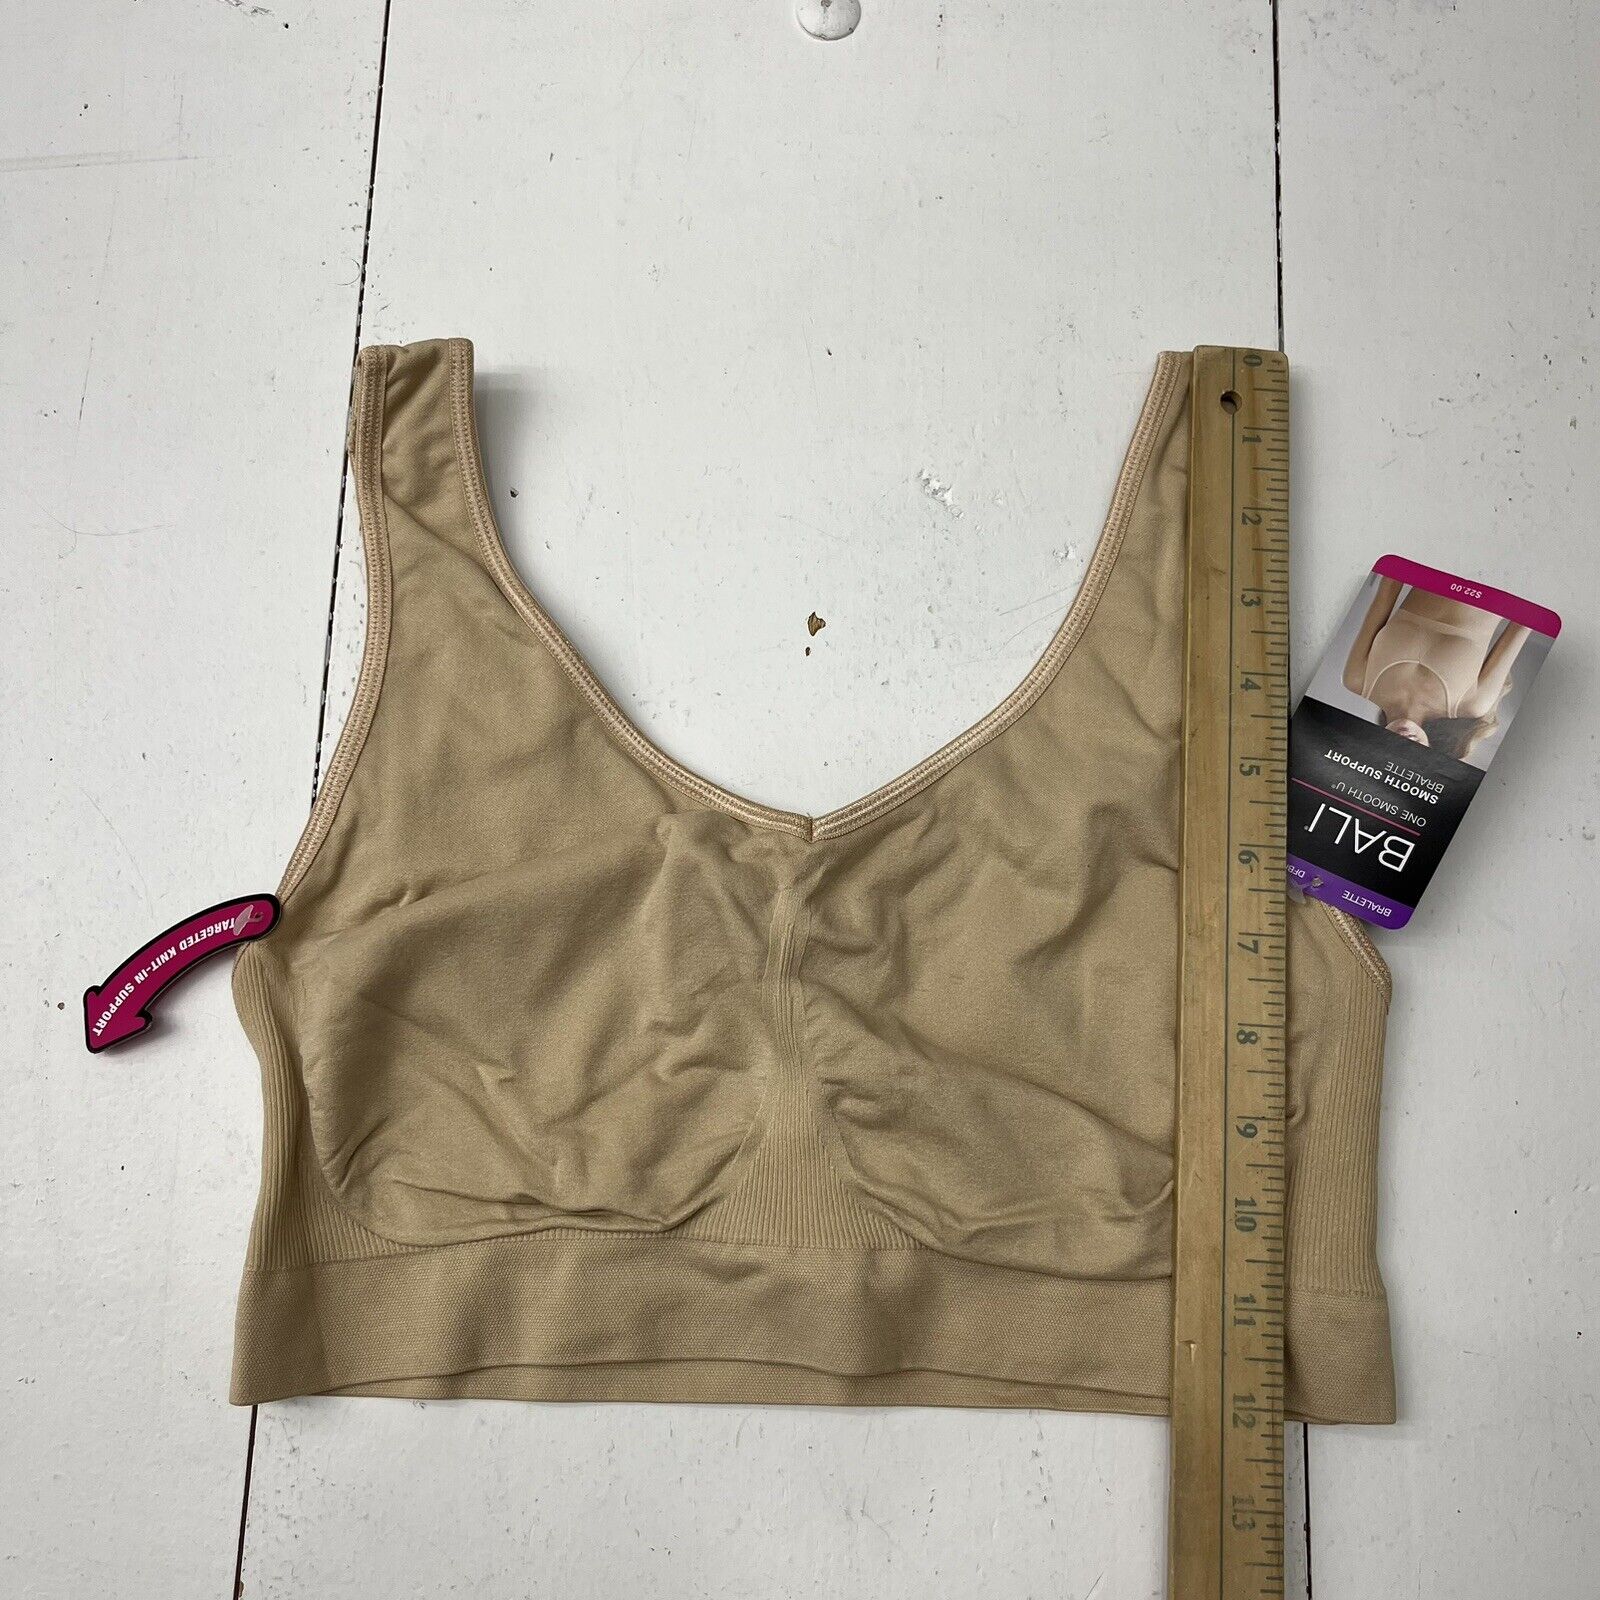 Bali Nude Smooth Support Seamless Bra Women's Size 2 XL NEW